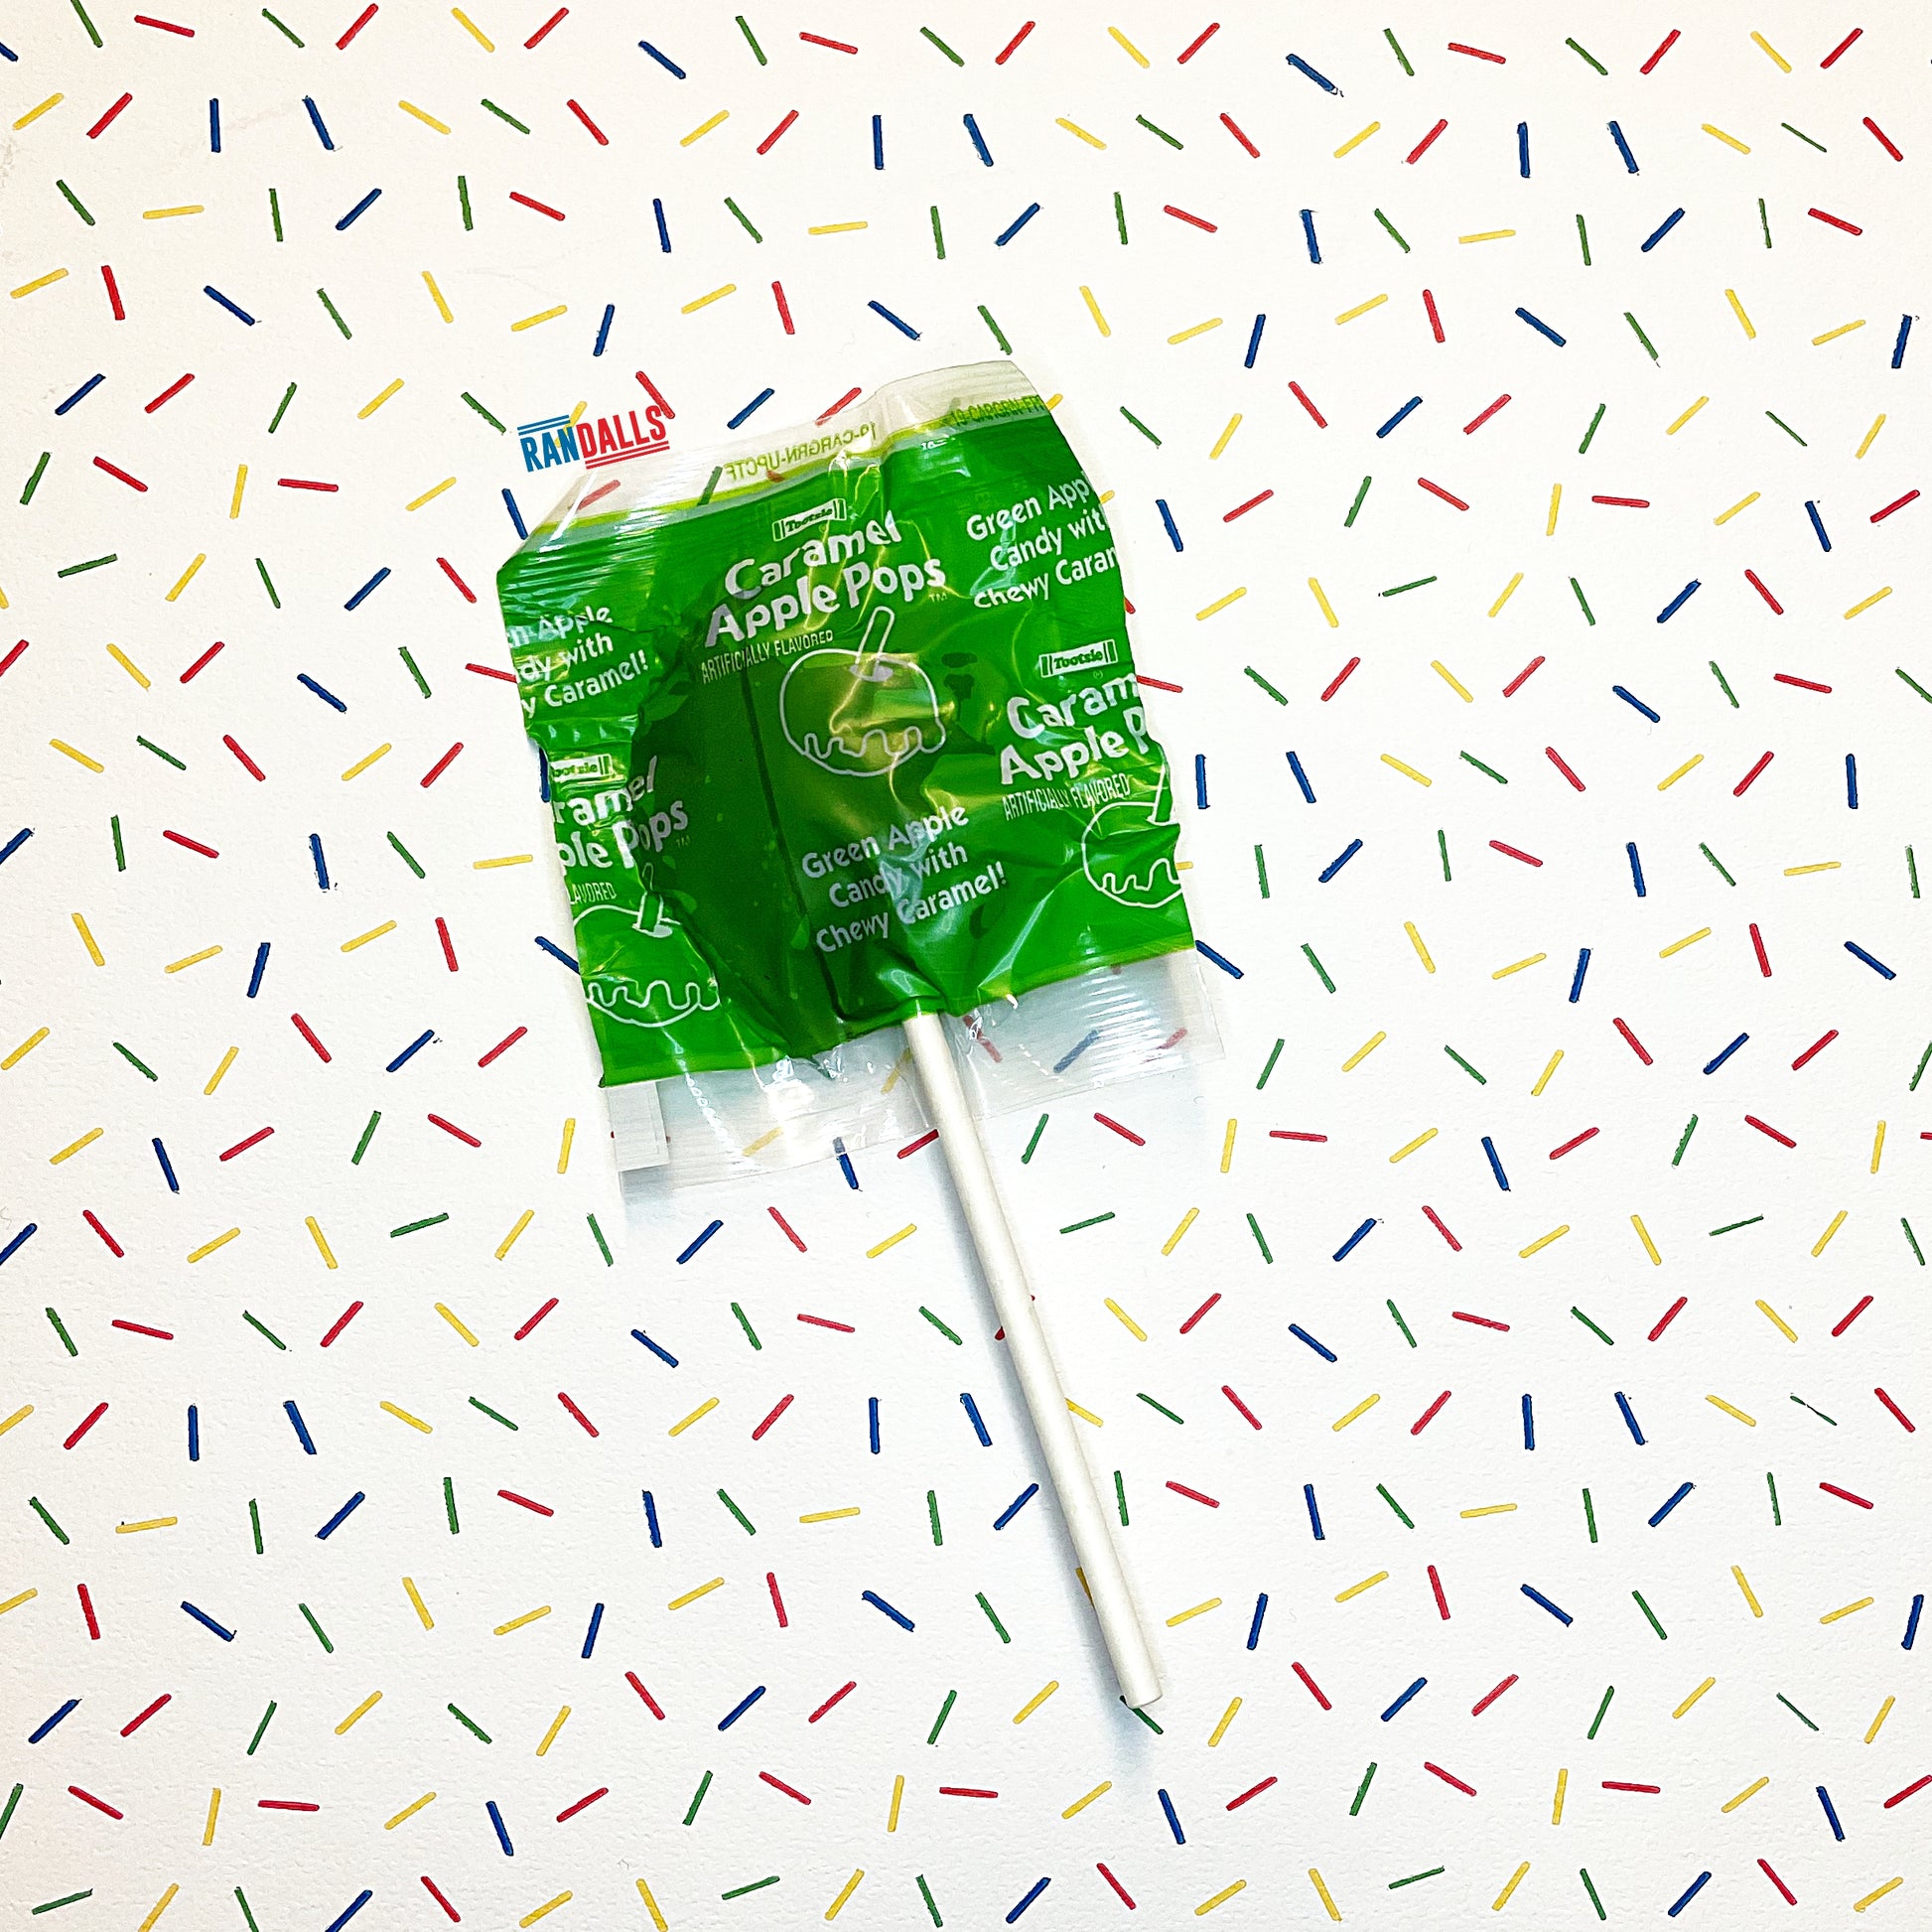 caramel apple pops, green apple candy with chewy caramel, lollipop, boiled sweet, candy